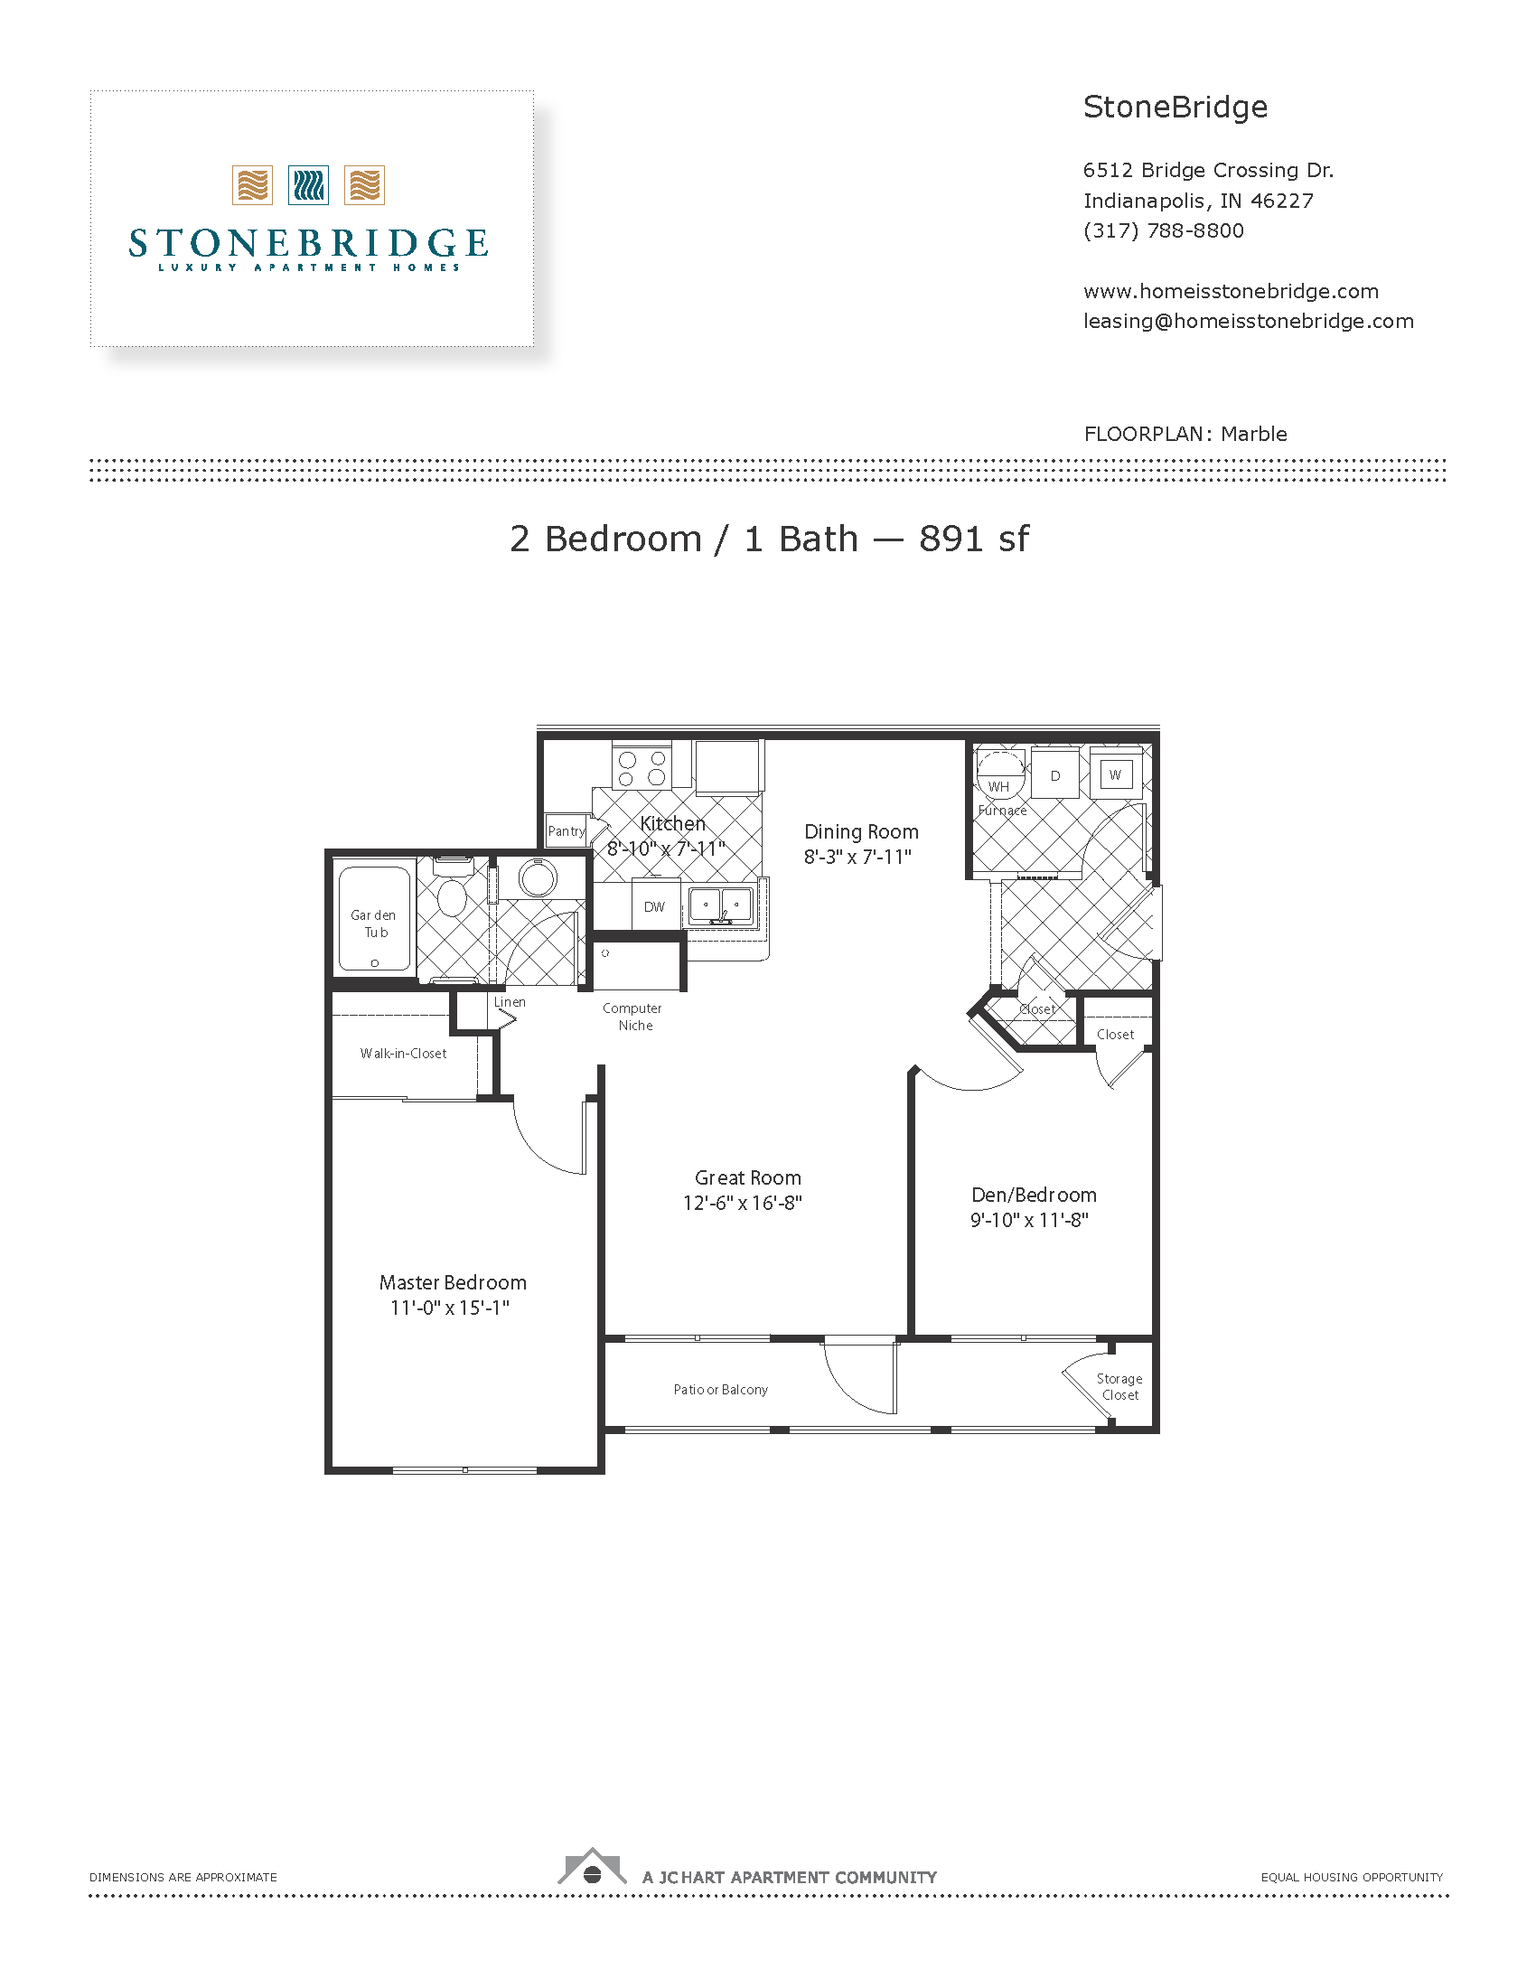 Marble floor plan - StoneBridge Apartment Homes _ Indianapolis apartments_preview.png